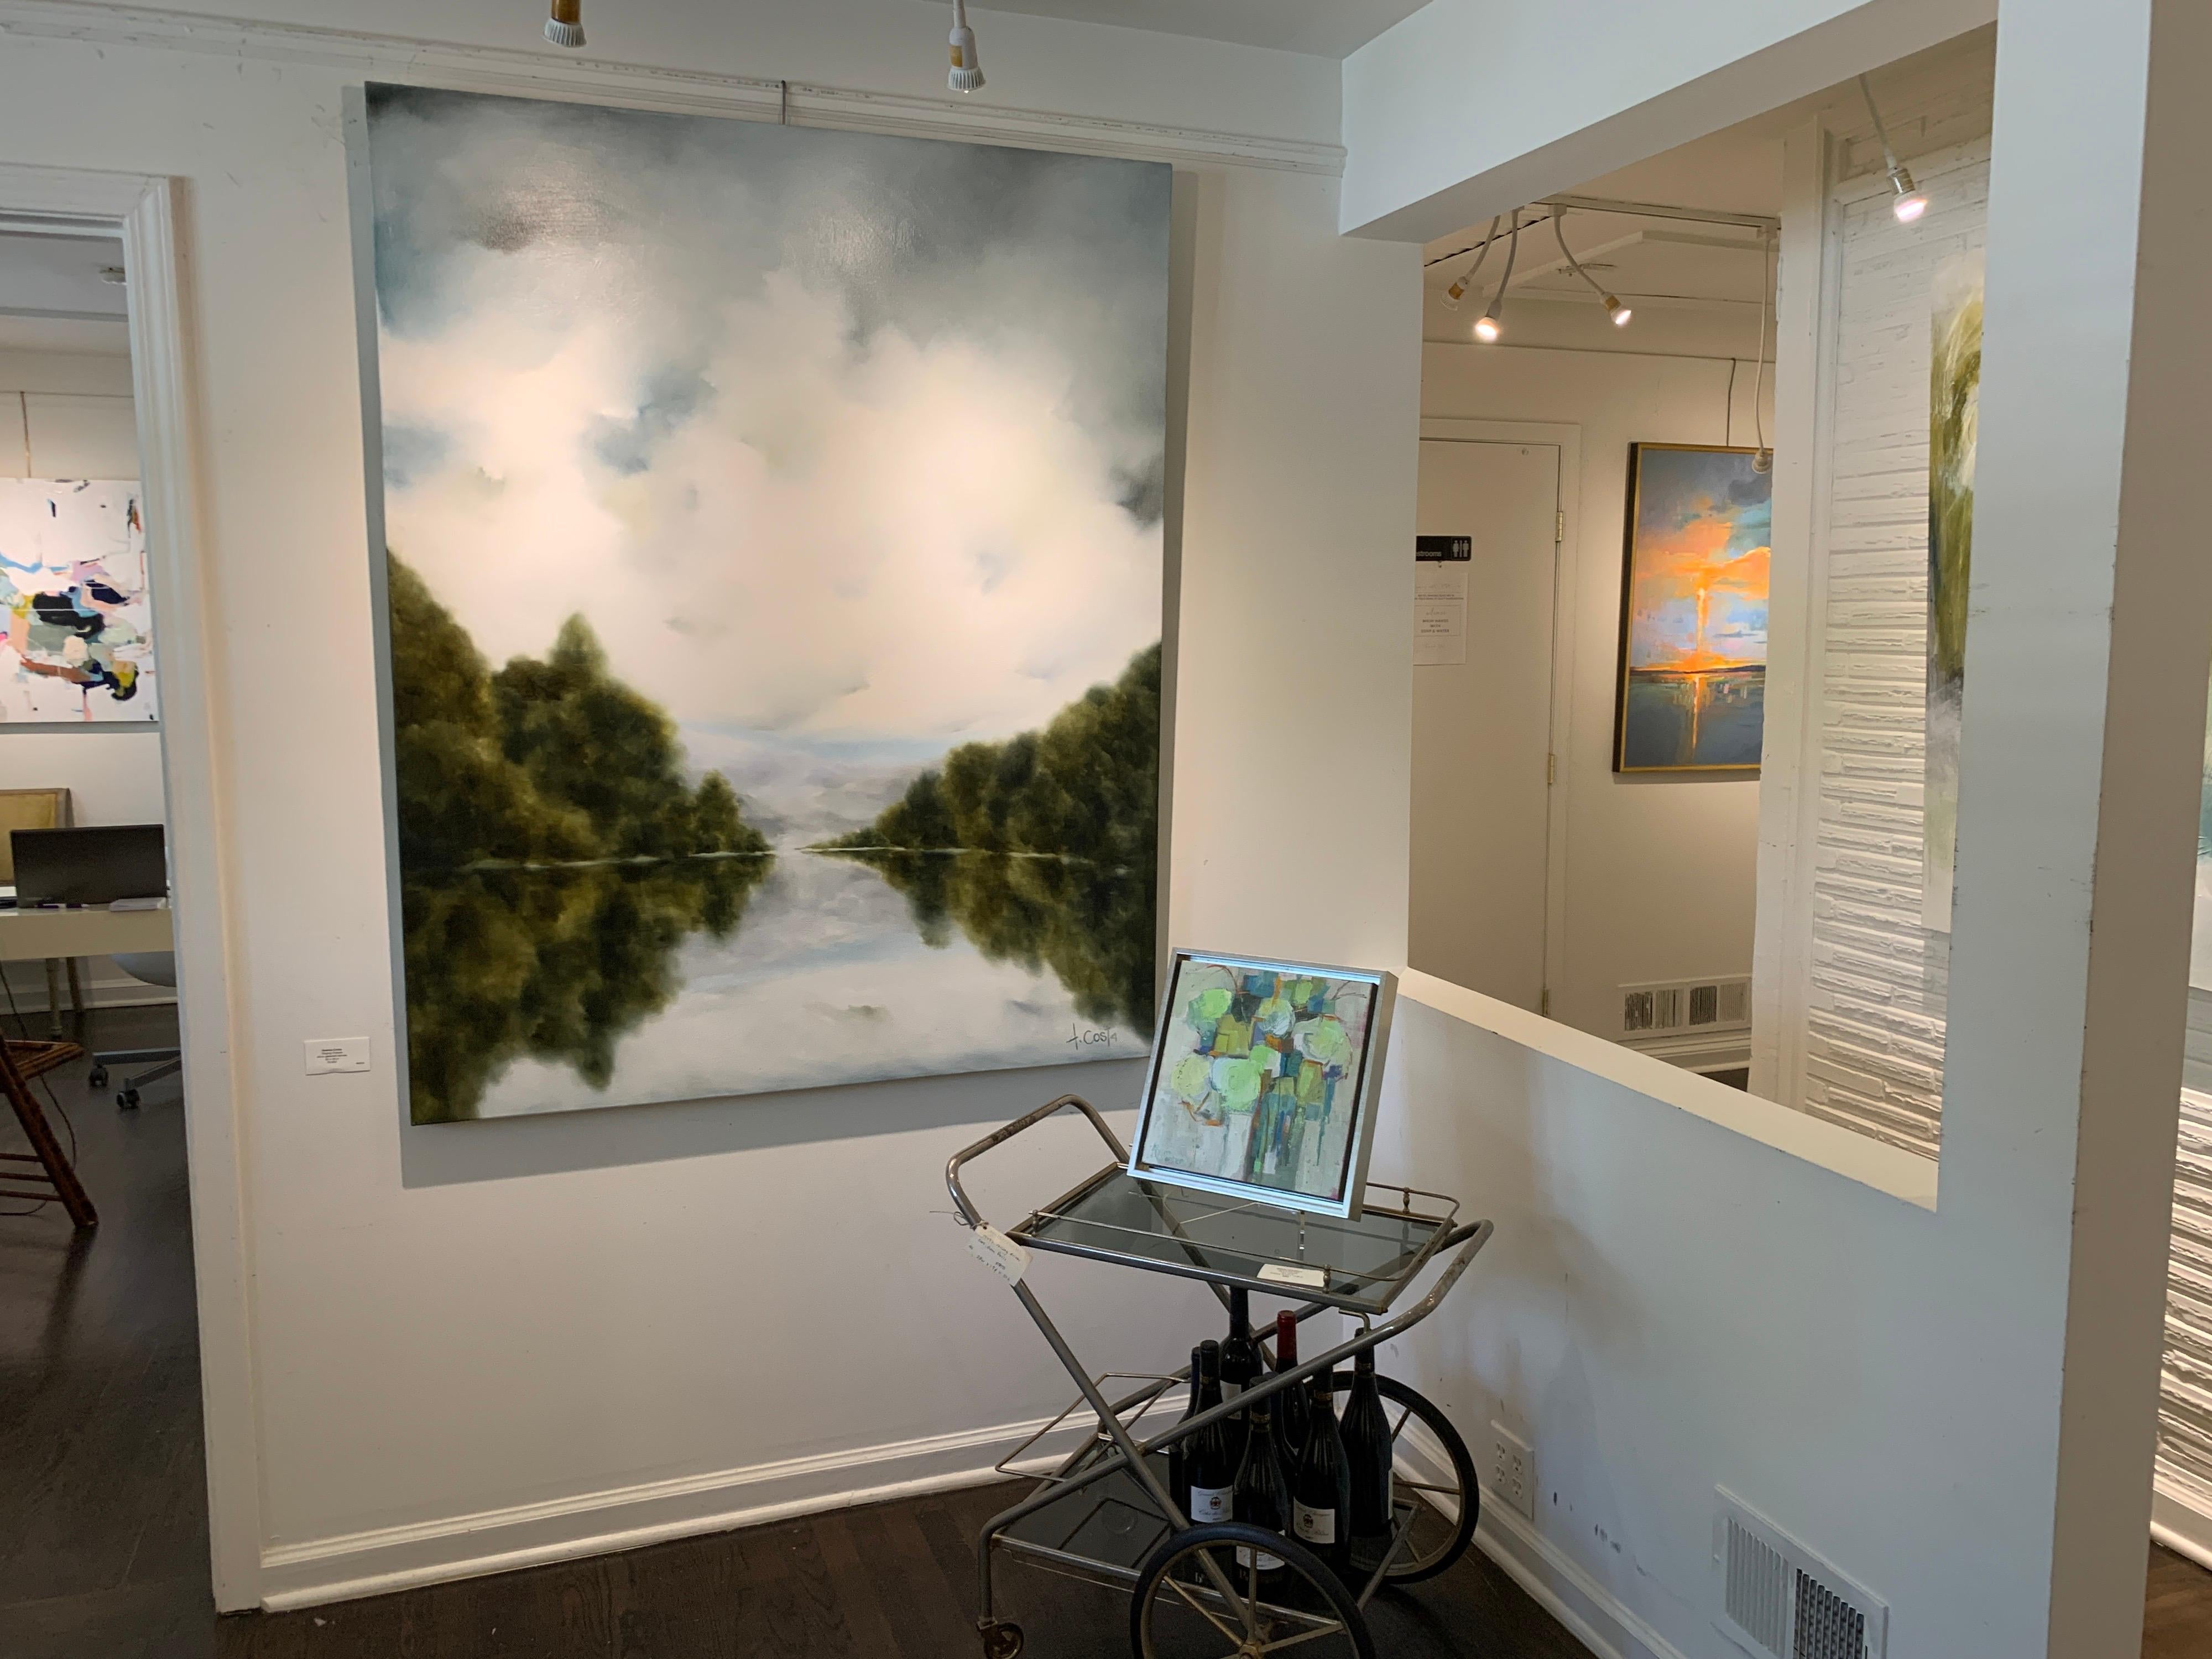 Costa approaches each painting by exploring the underlying narrative and metaphor, and emotion of the Landscape. She embraces the creative process while incorporating the classical training she received at Clayton State University and perfected with